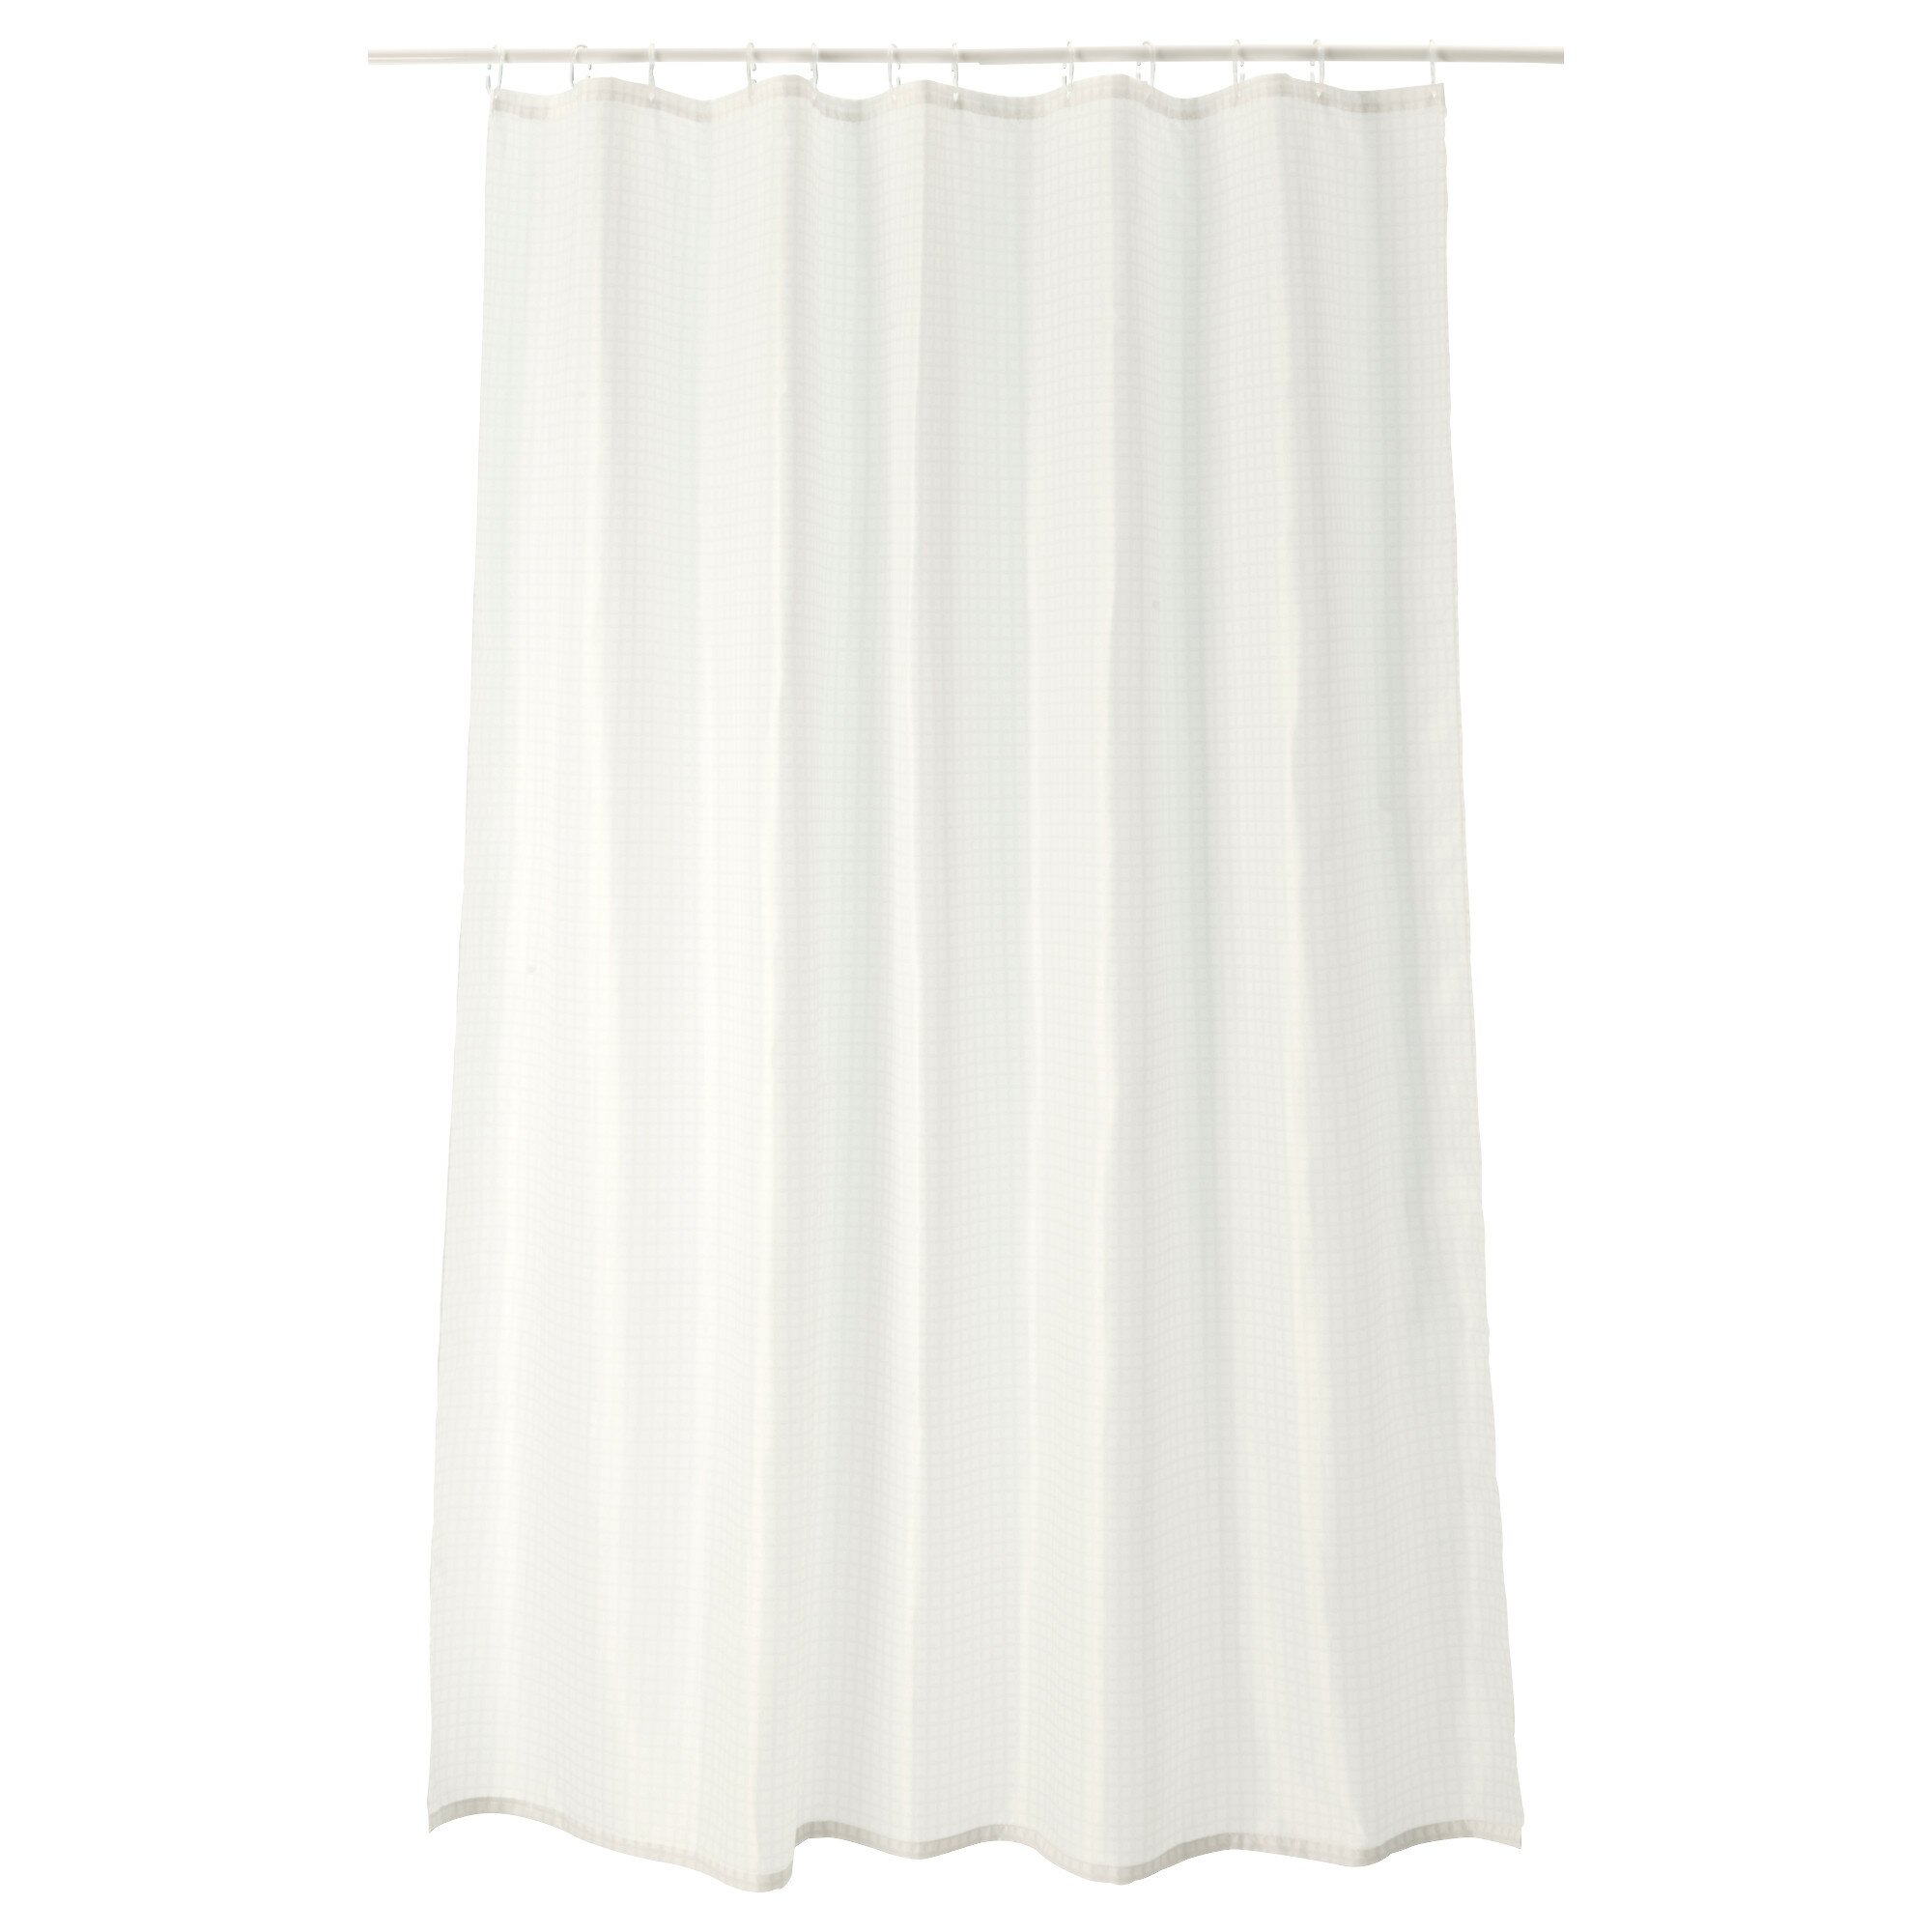 Extra Long Shower Curtain Target | Ikea Shower Curtain | See Through Shower Curtains